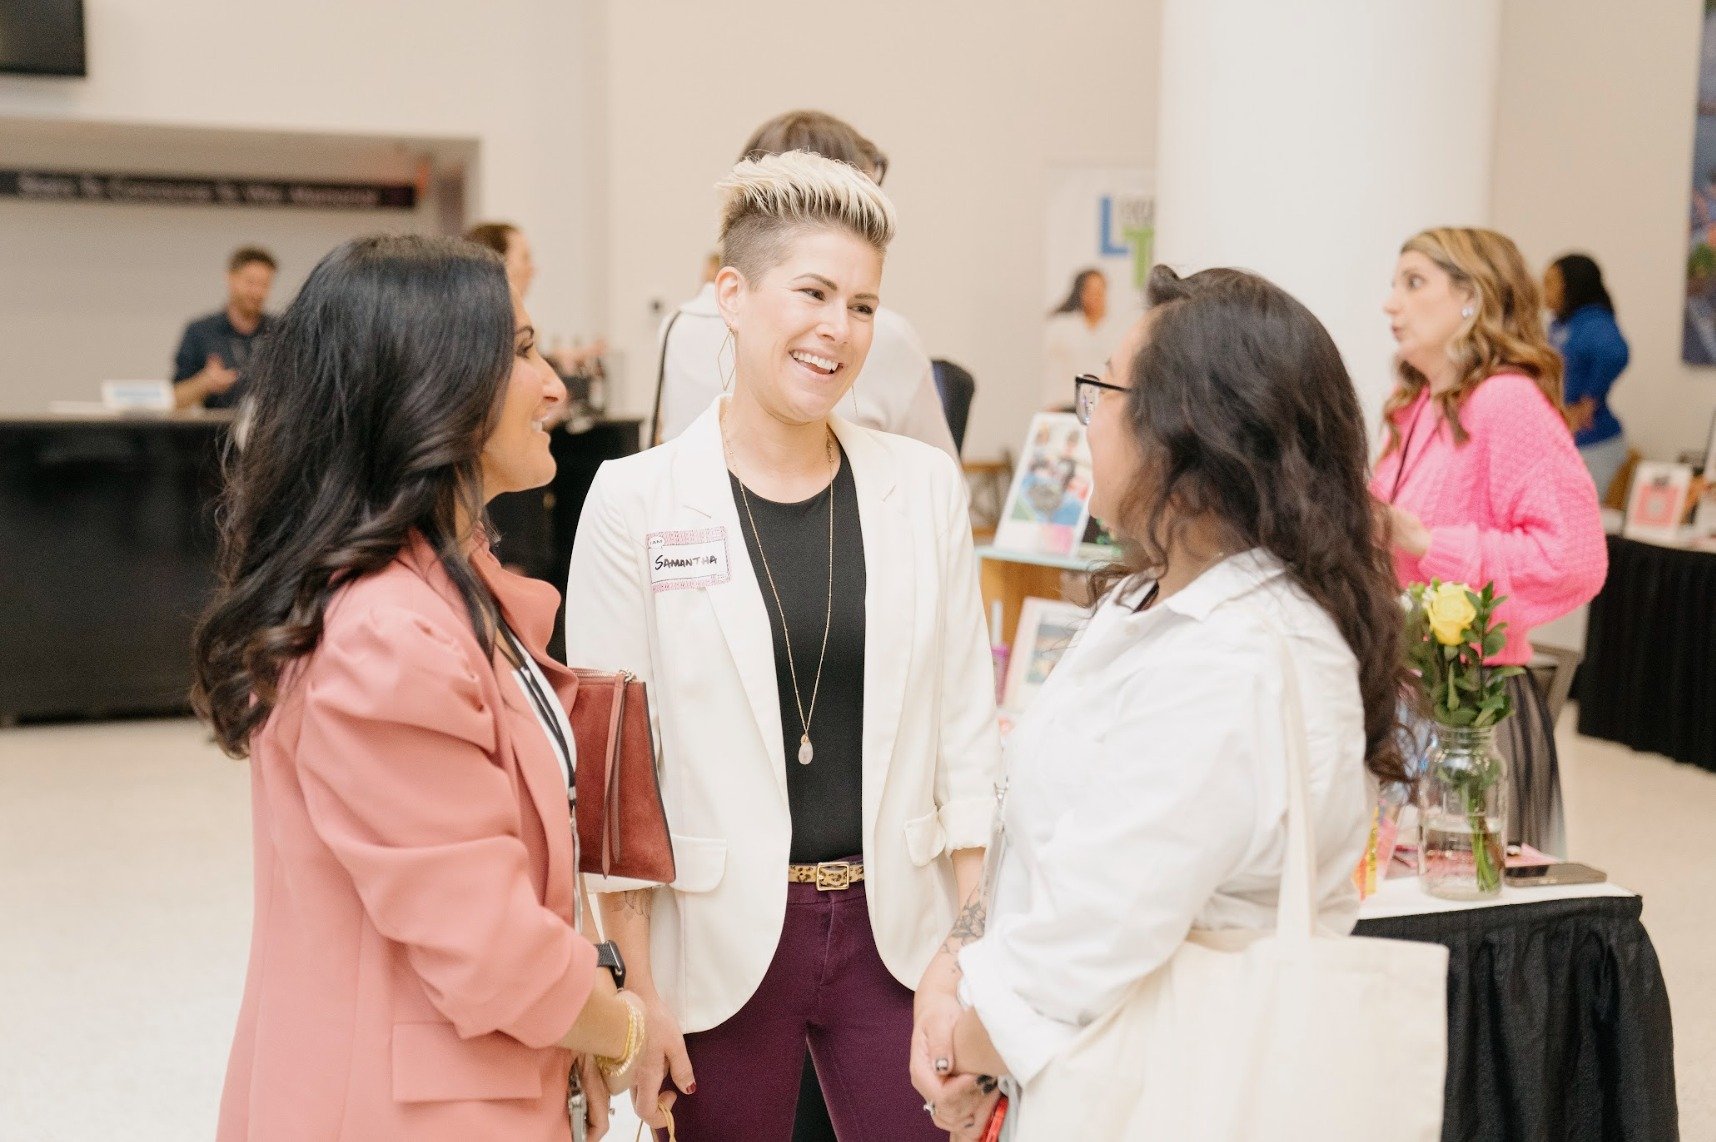 Women in business, take note of this new Chamber member! 

@cnywomensnetwork is designed to serve and inspire women in CNY while promoting and amplifying CNY's small business economy. They believe in the power of women coming together to connect, gro